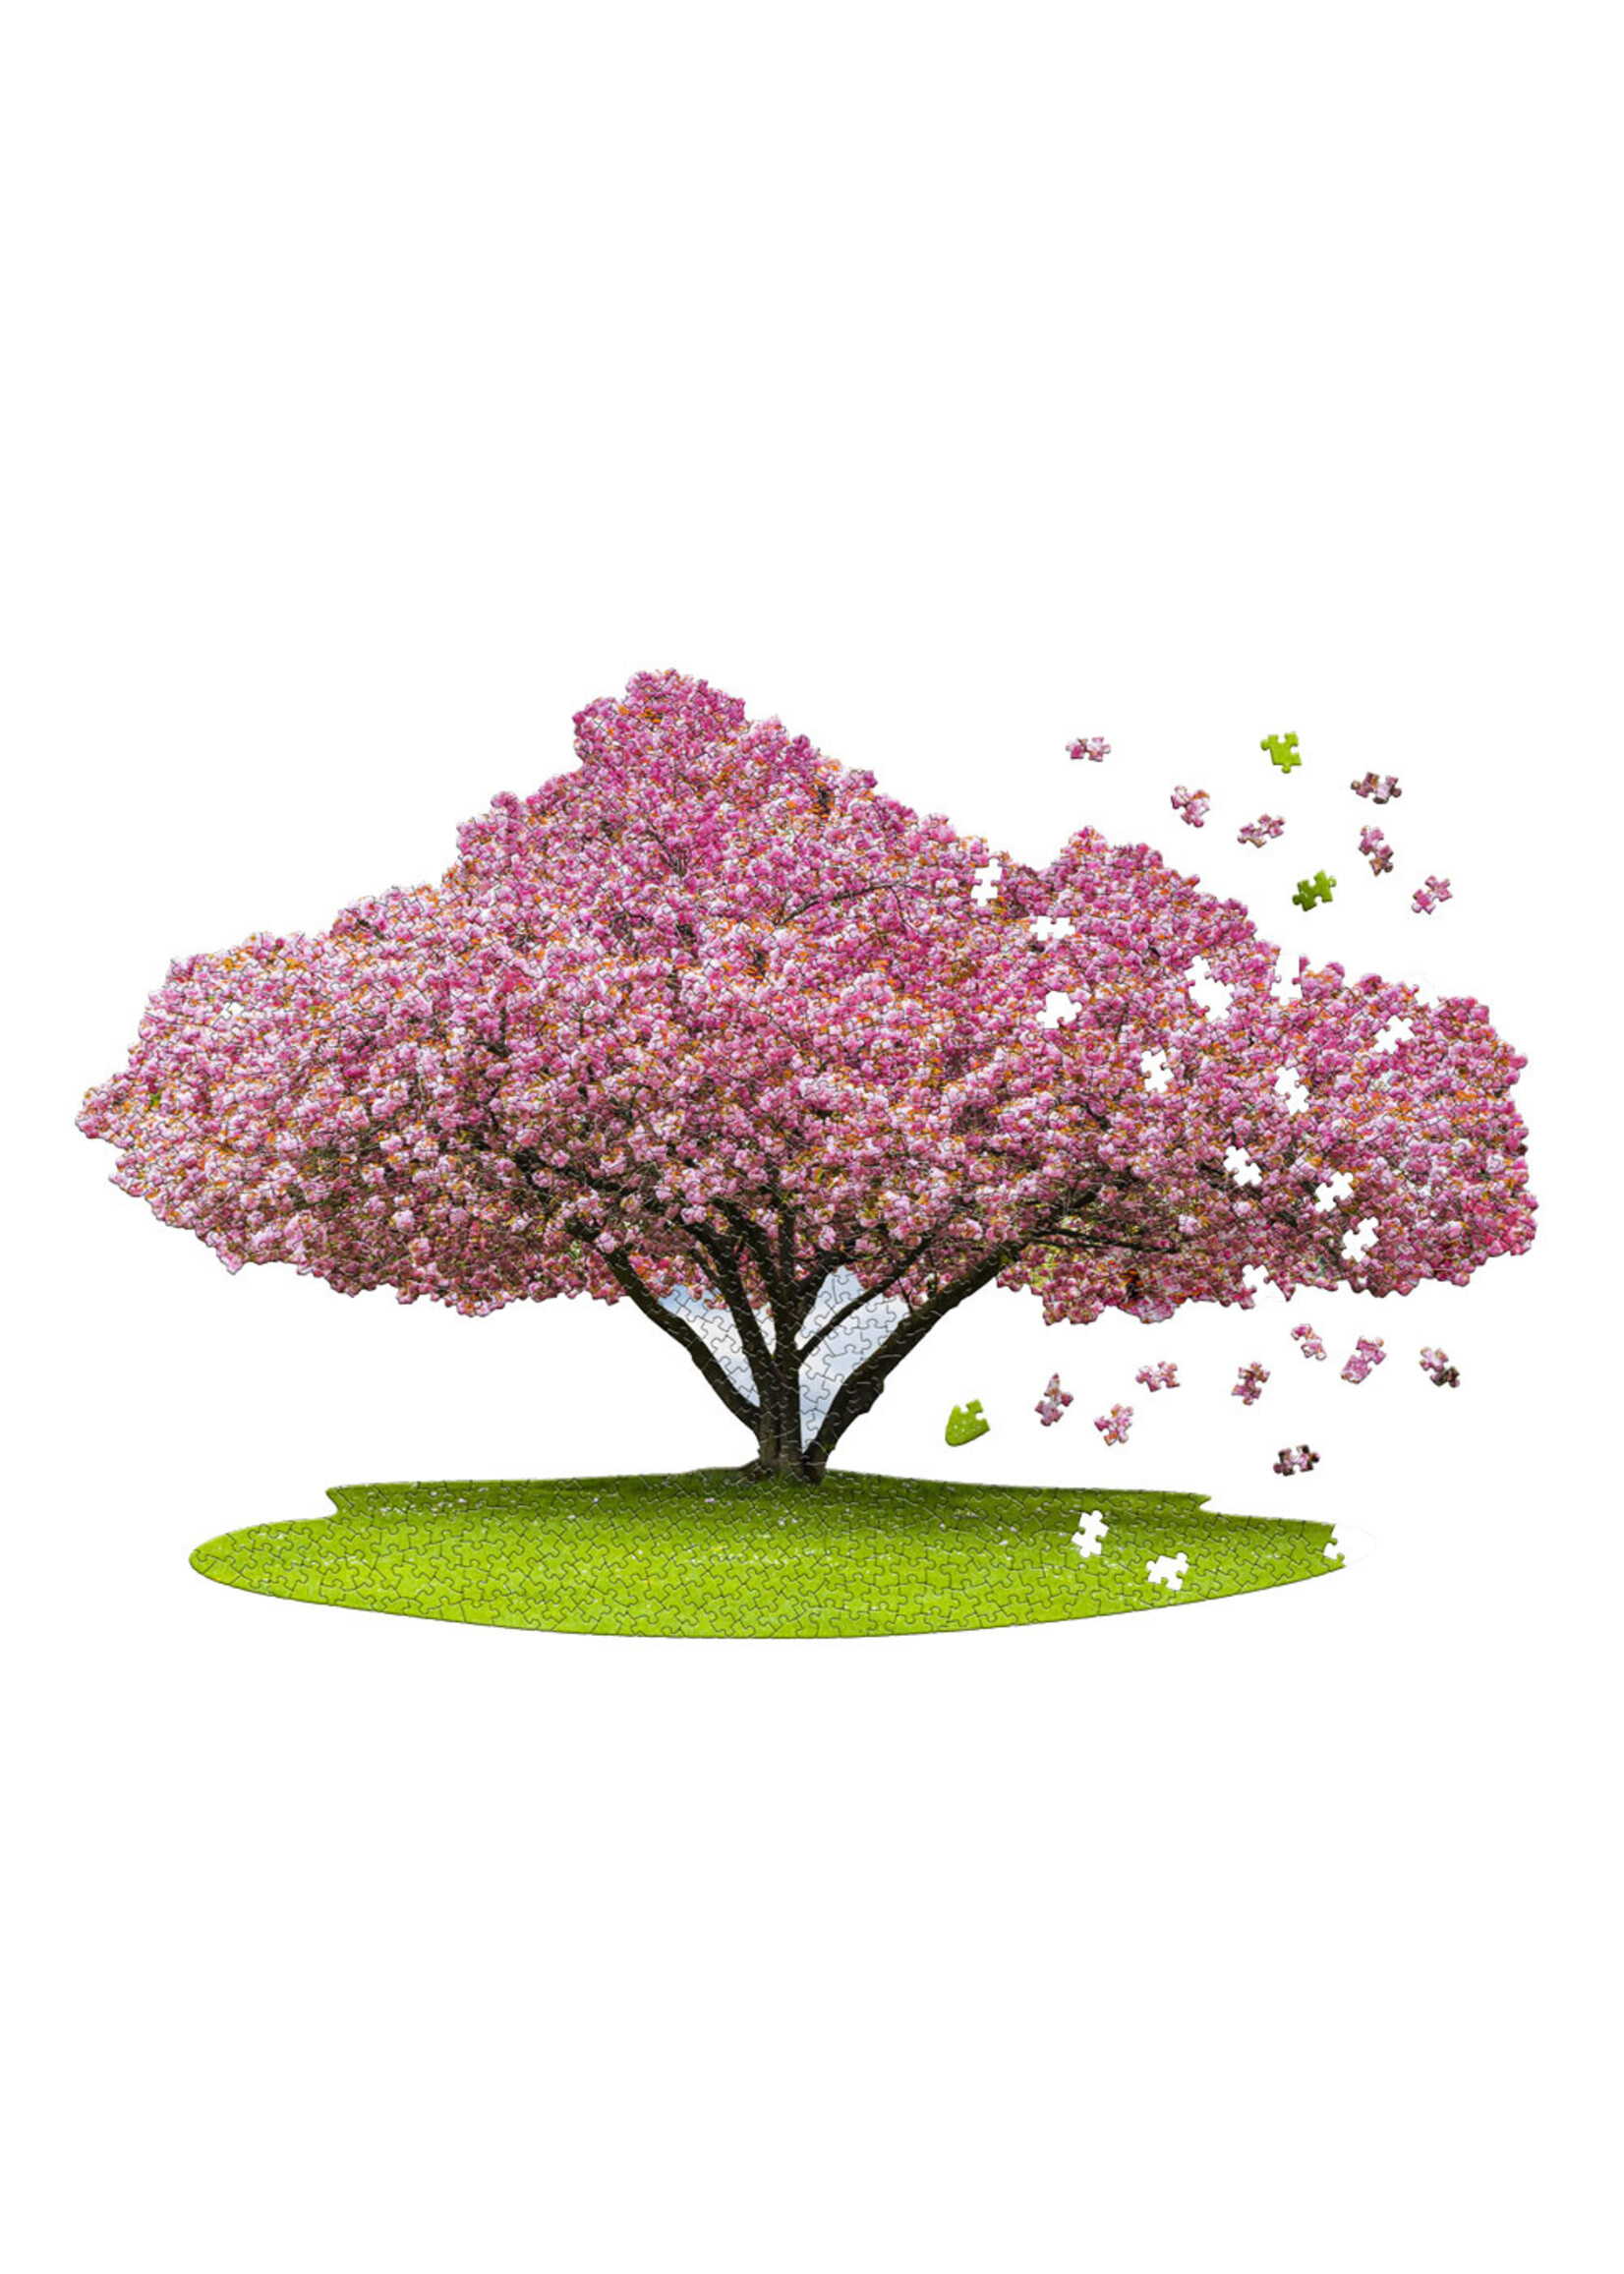 Madd Capp Games & Puzzles PUZZLE - I AM CHERRY BLOSSOM 1000 pieces